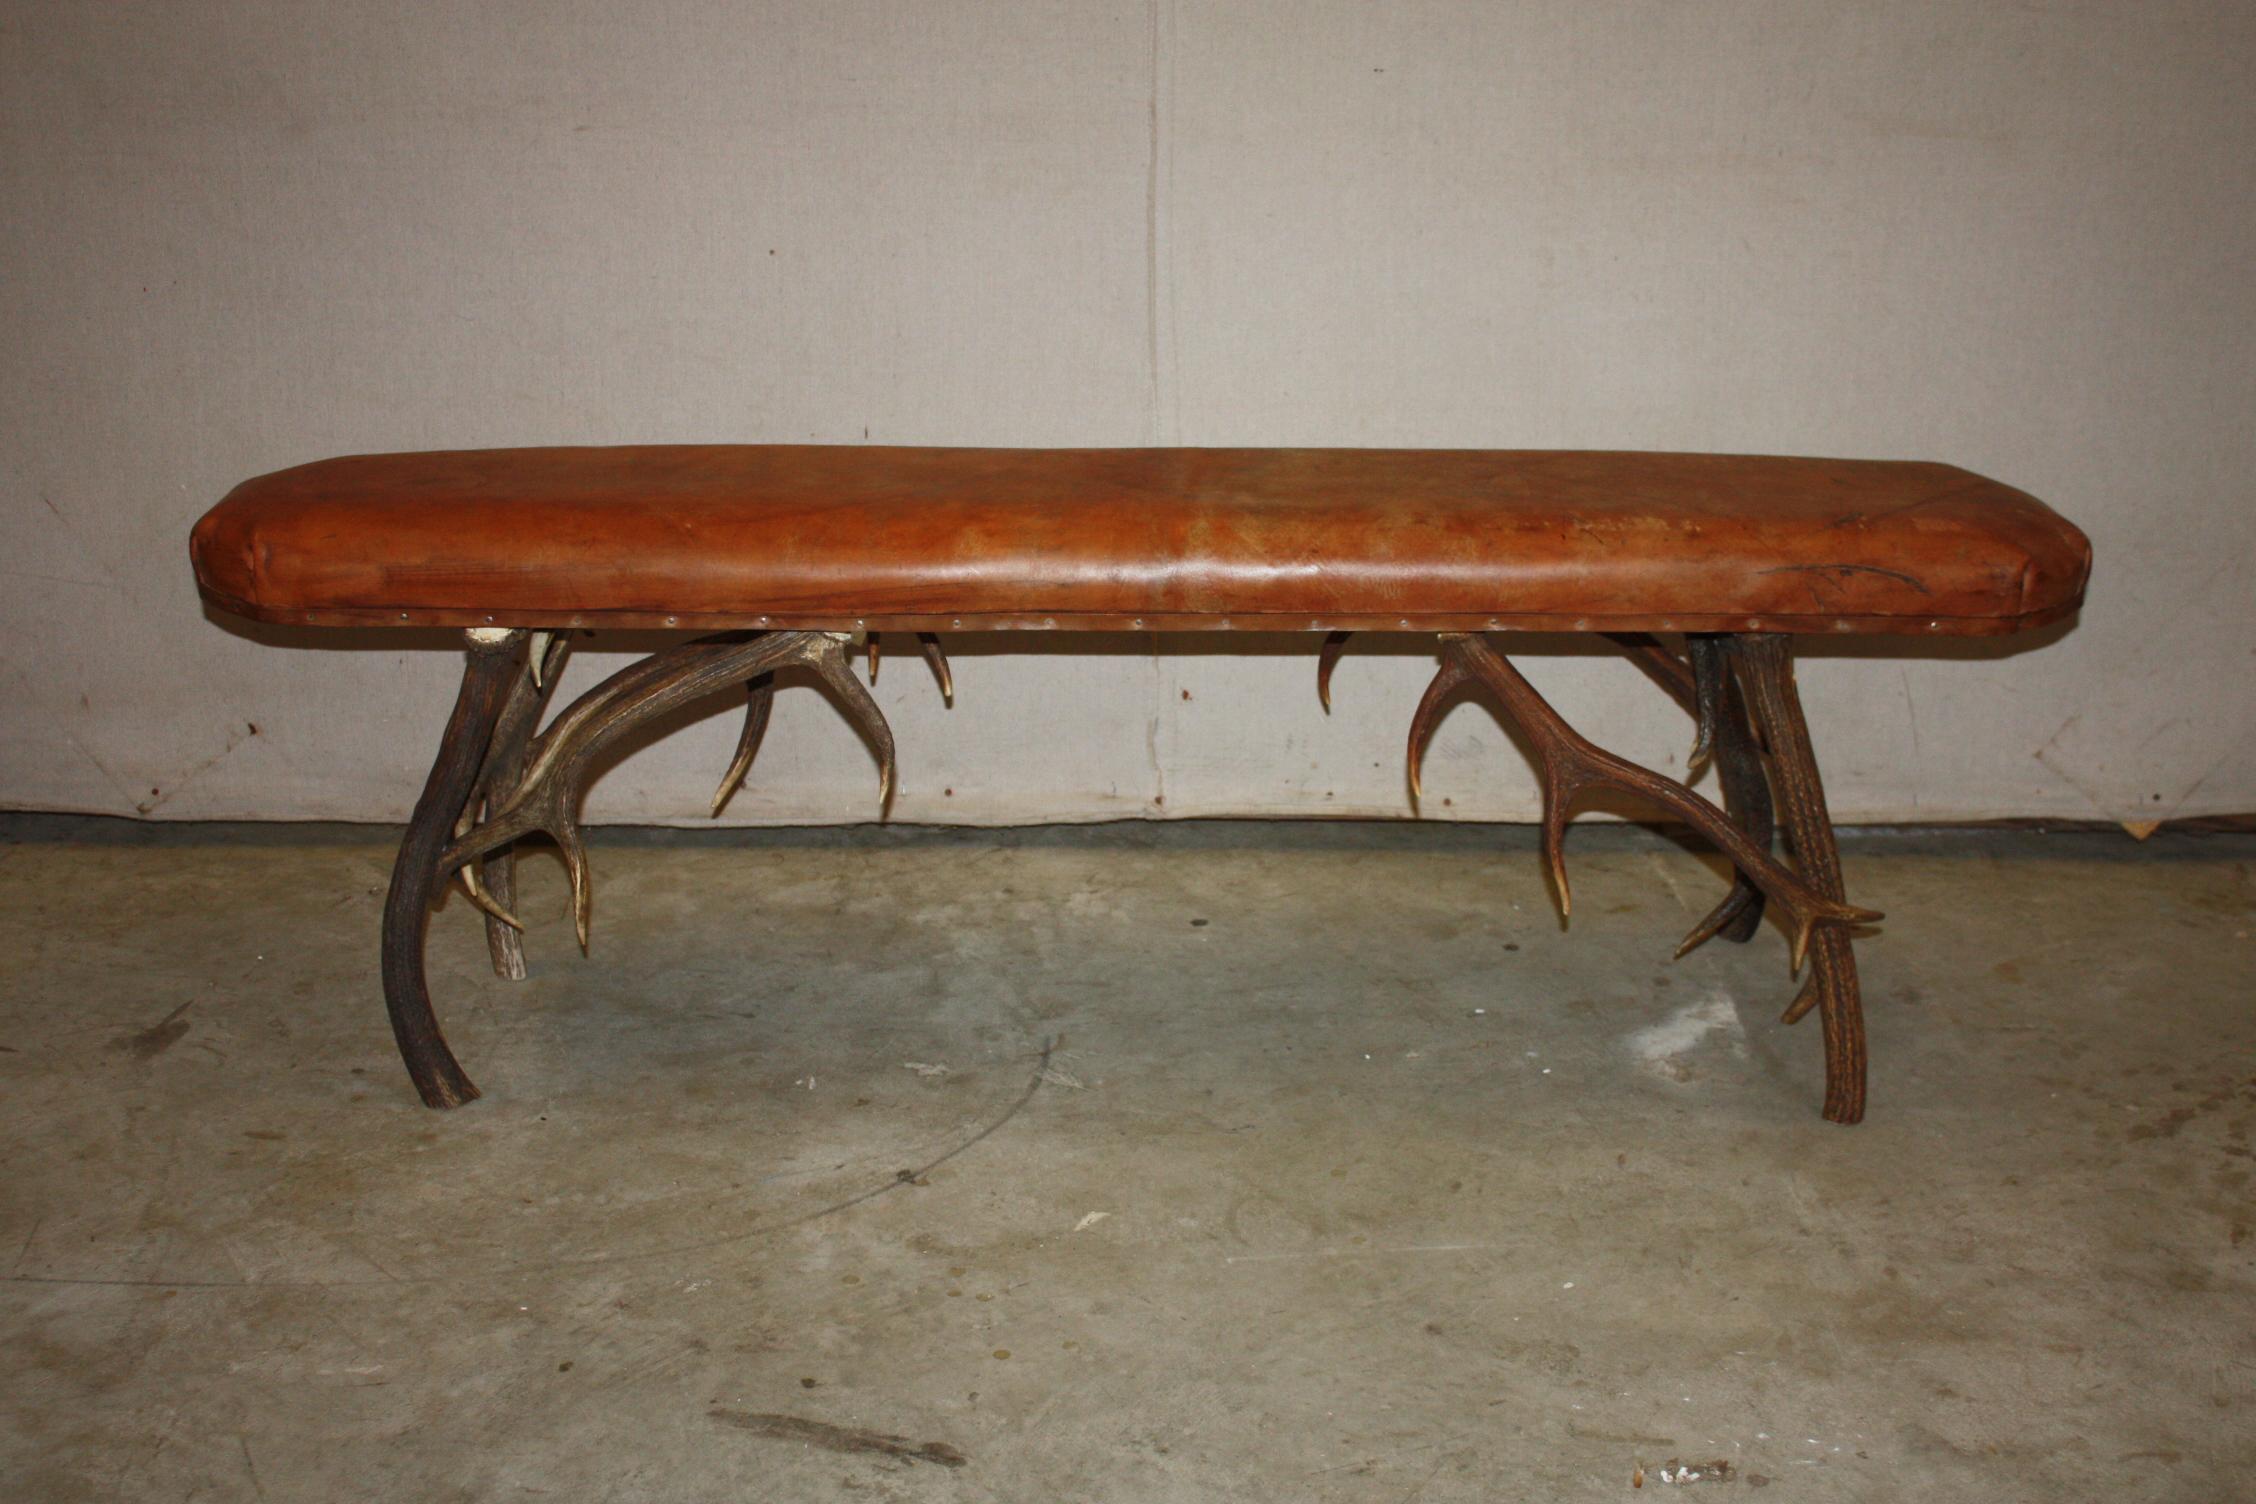 This is a great looking stag horn leather top bench I purchased in England. The leather is a nice worn saddle color. There is wear on the leather.